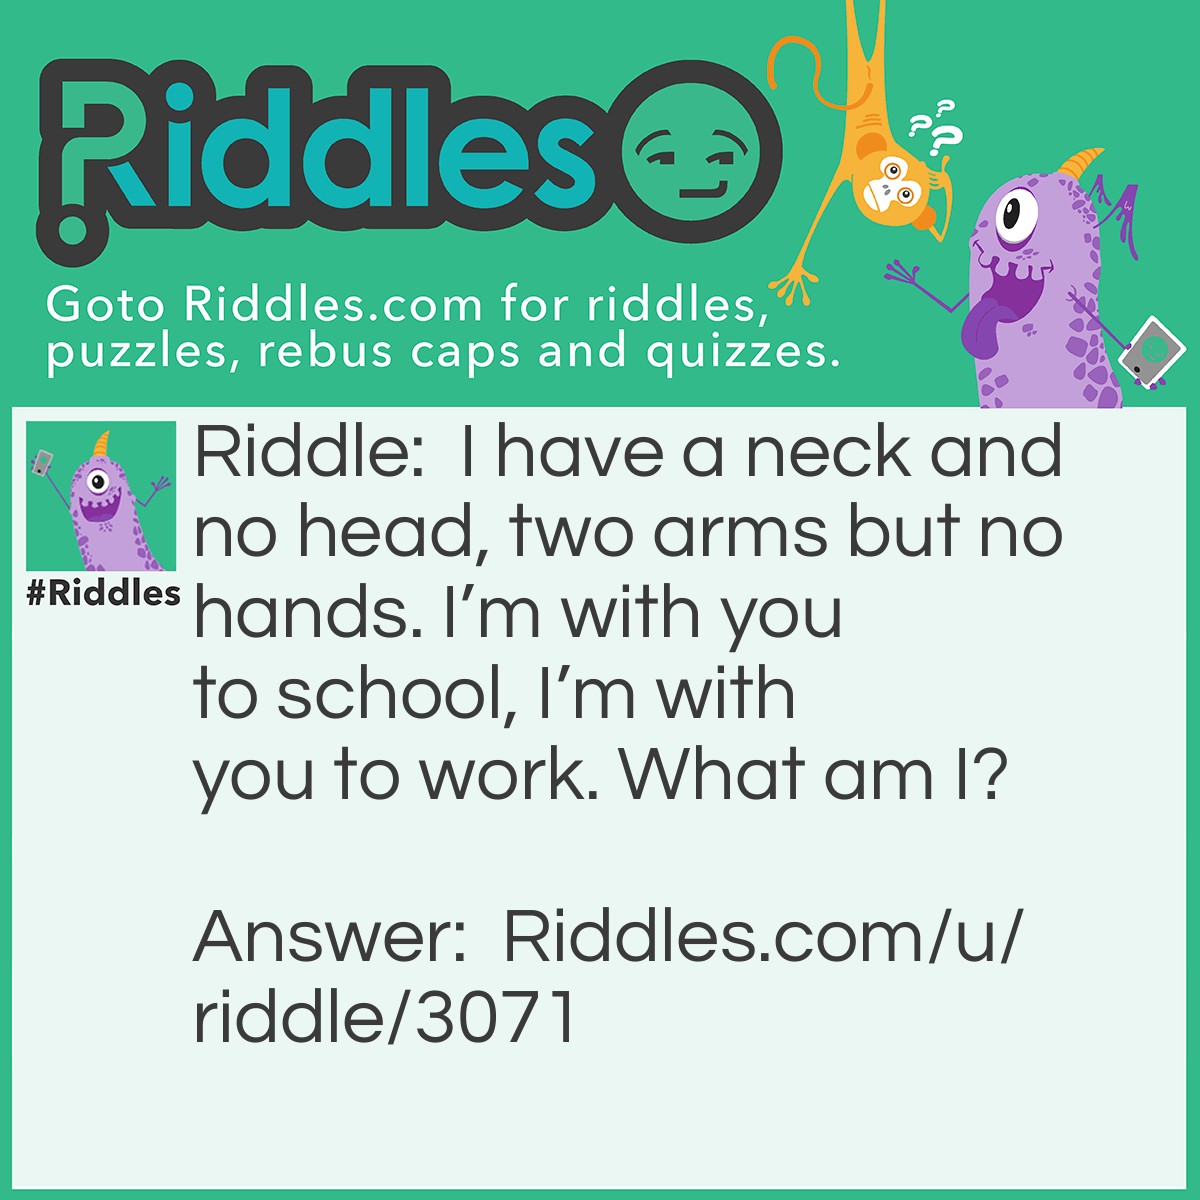 Riddle: I have a neck and no head, two arms but no hands. I'm with you to school, I'm with you to work. What am I? Answer: A Shirt.